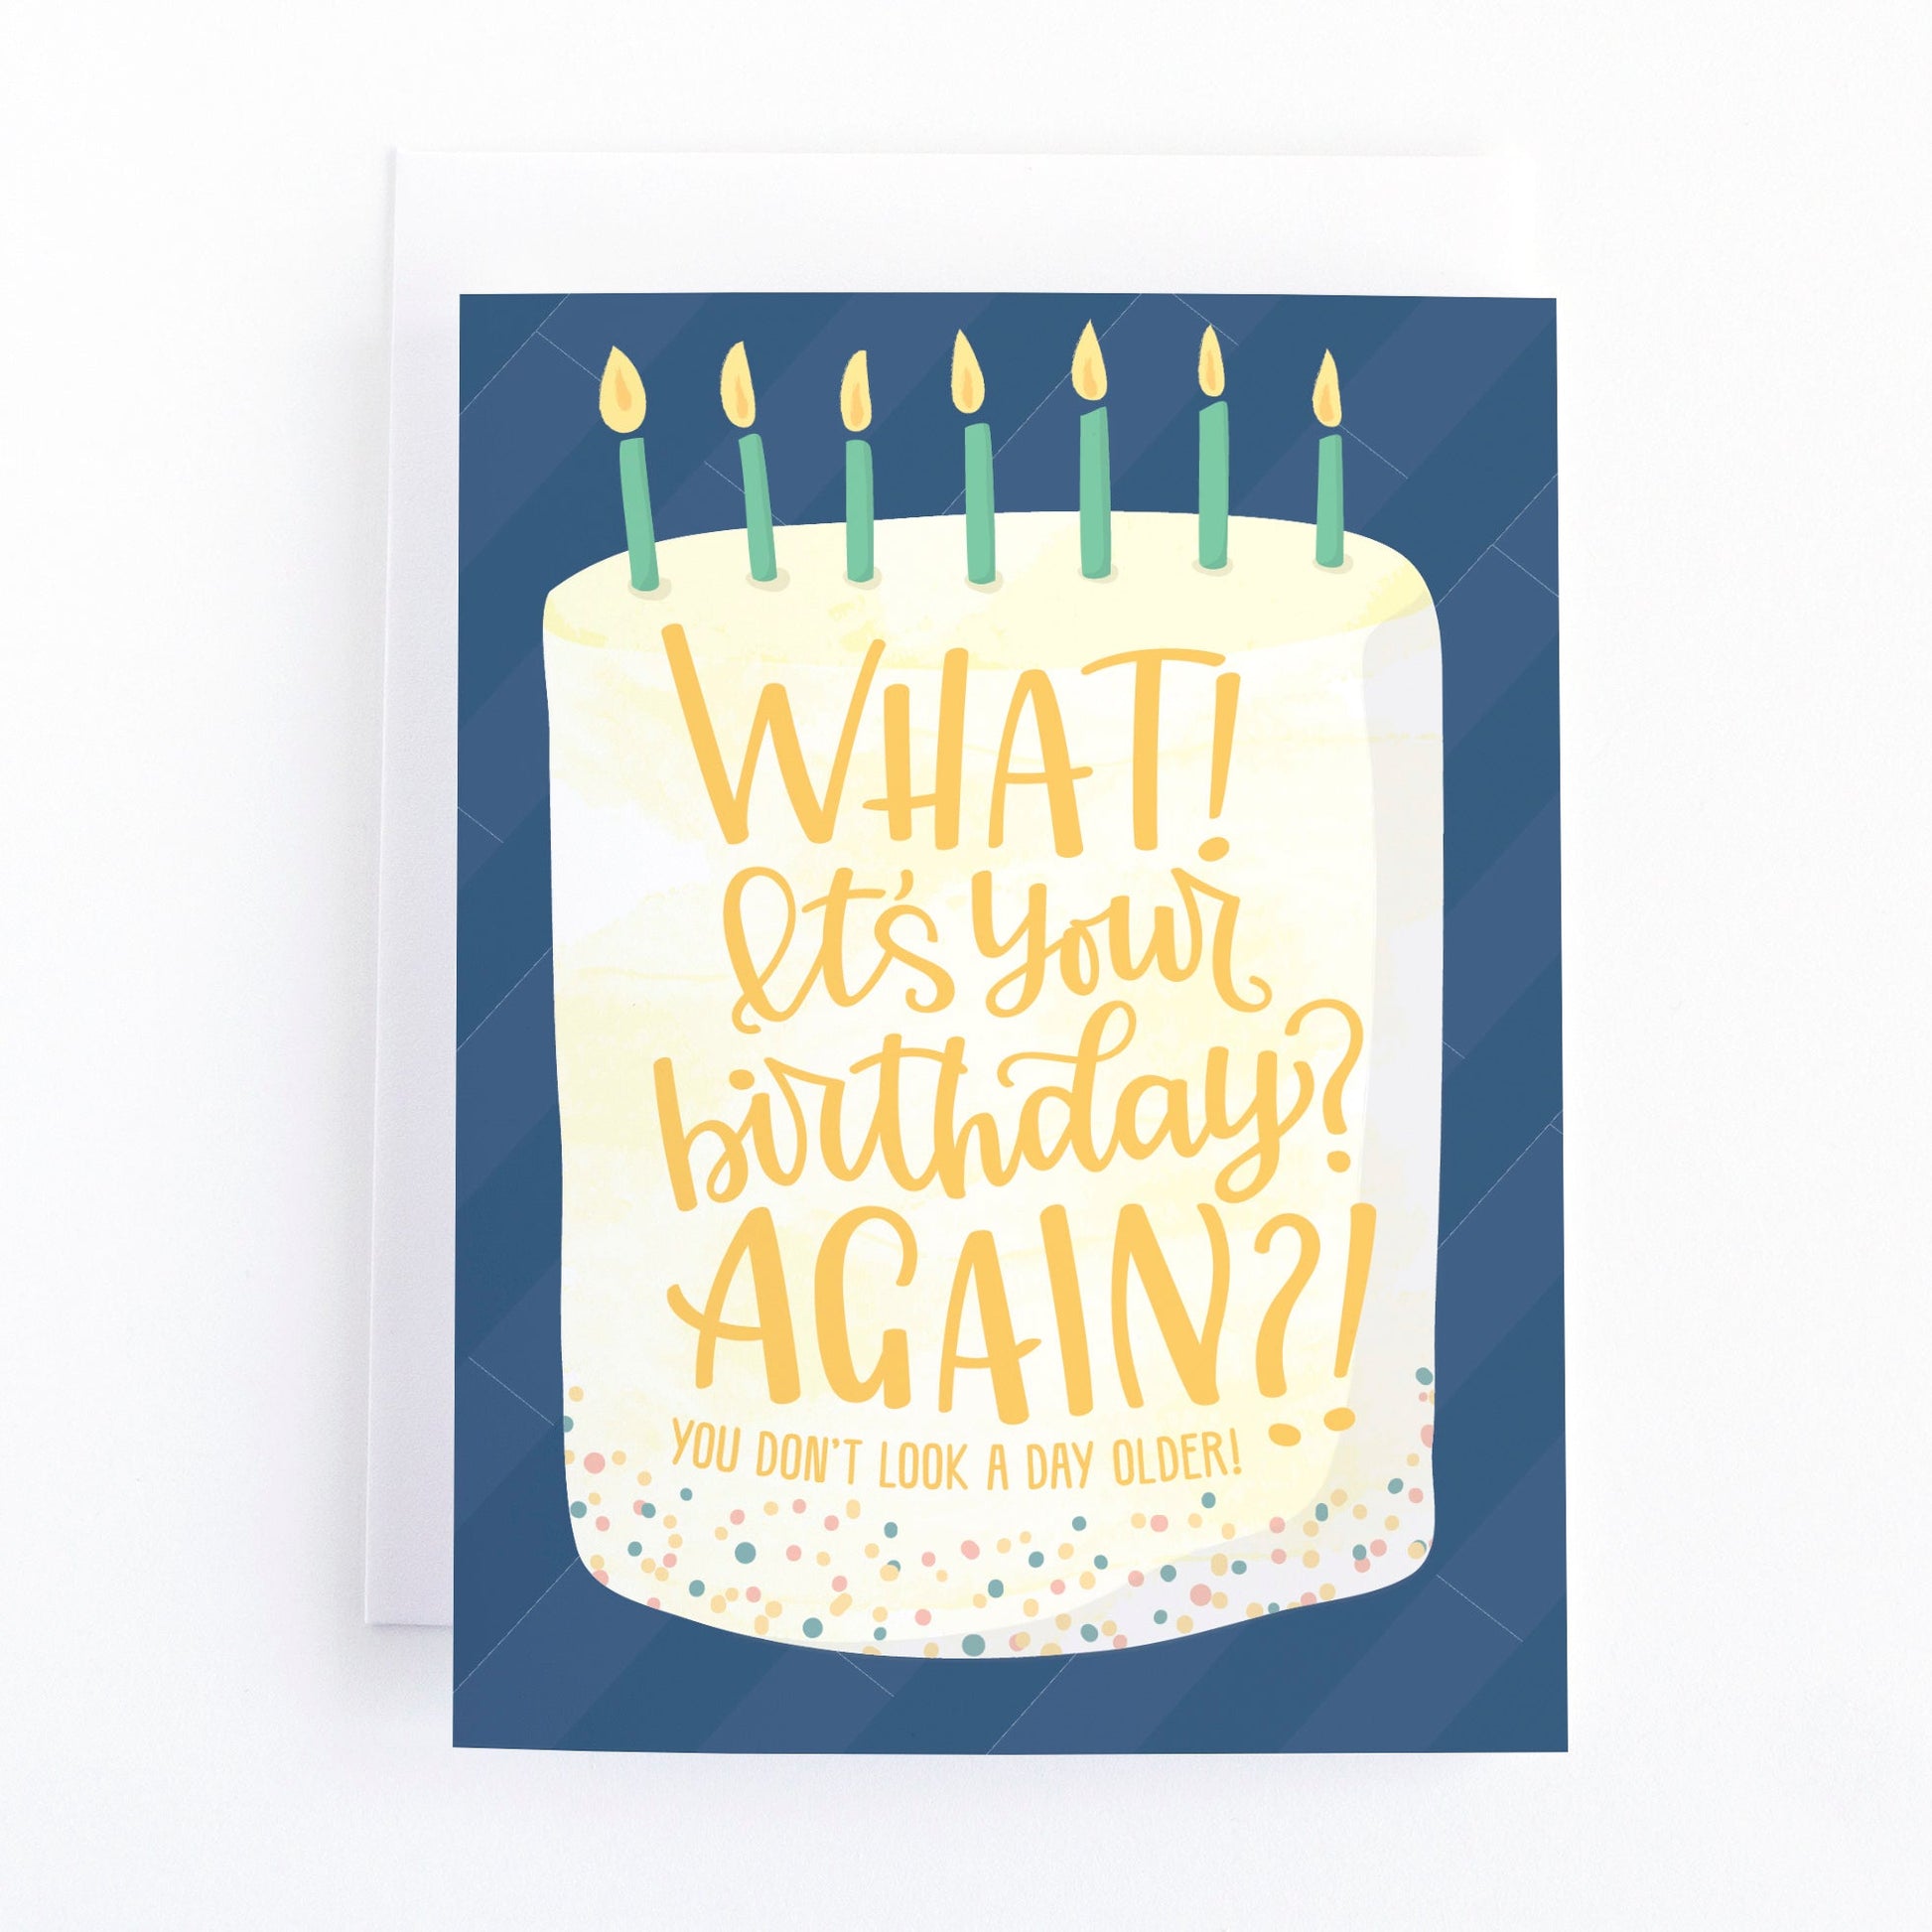 Birthday Card - You Say It's Your Birthday